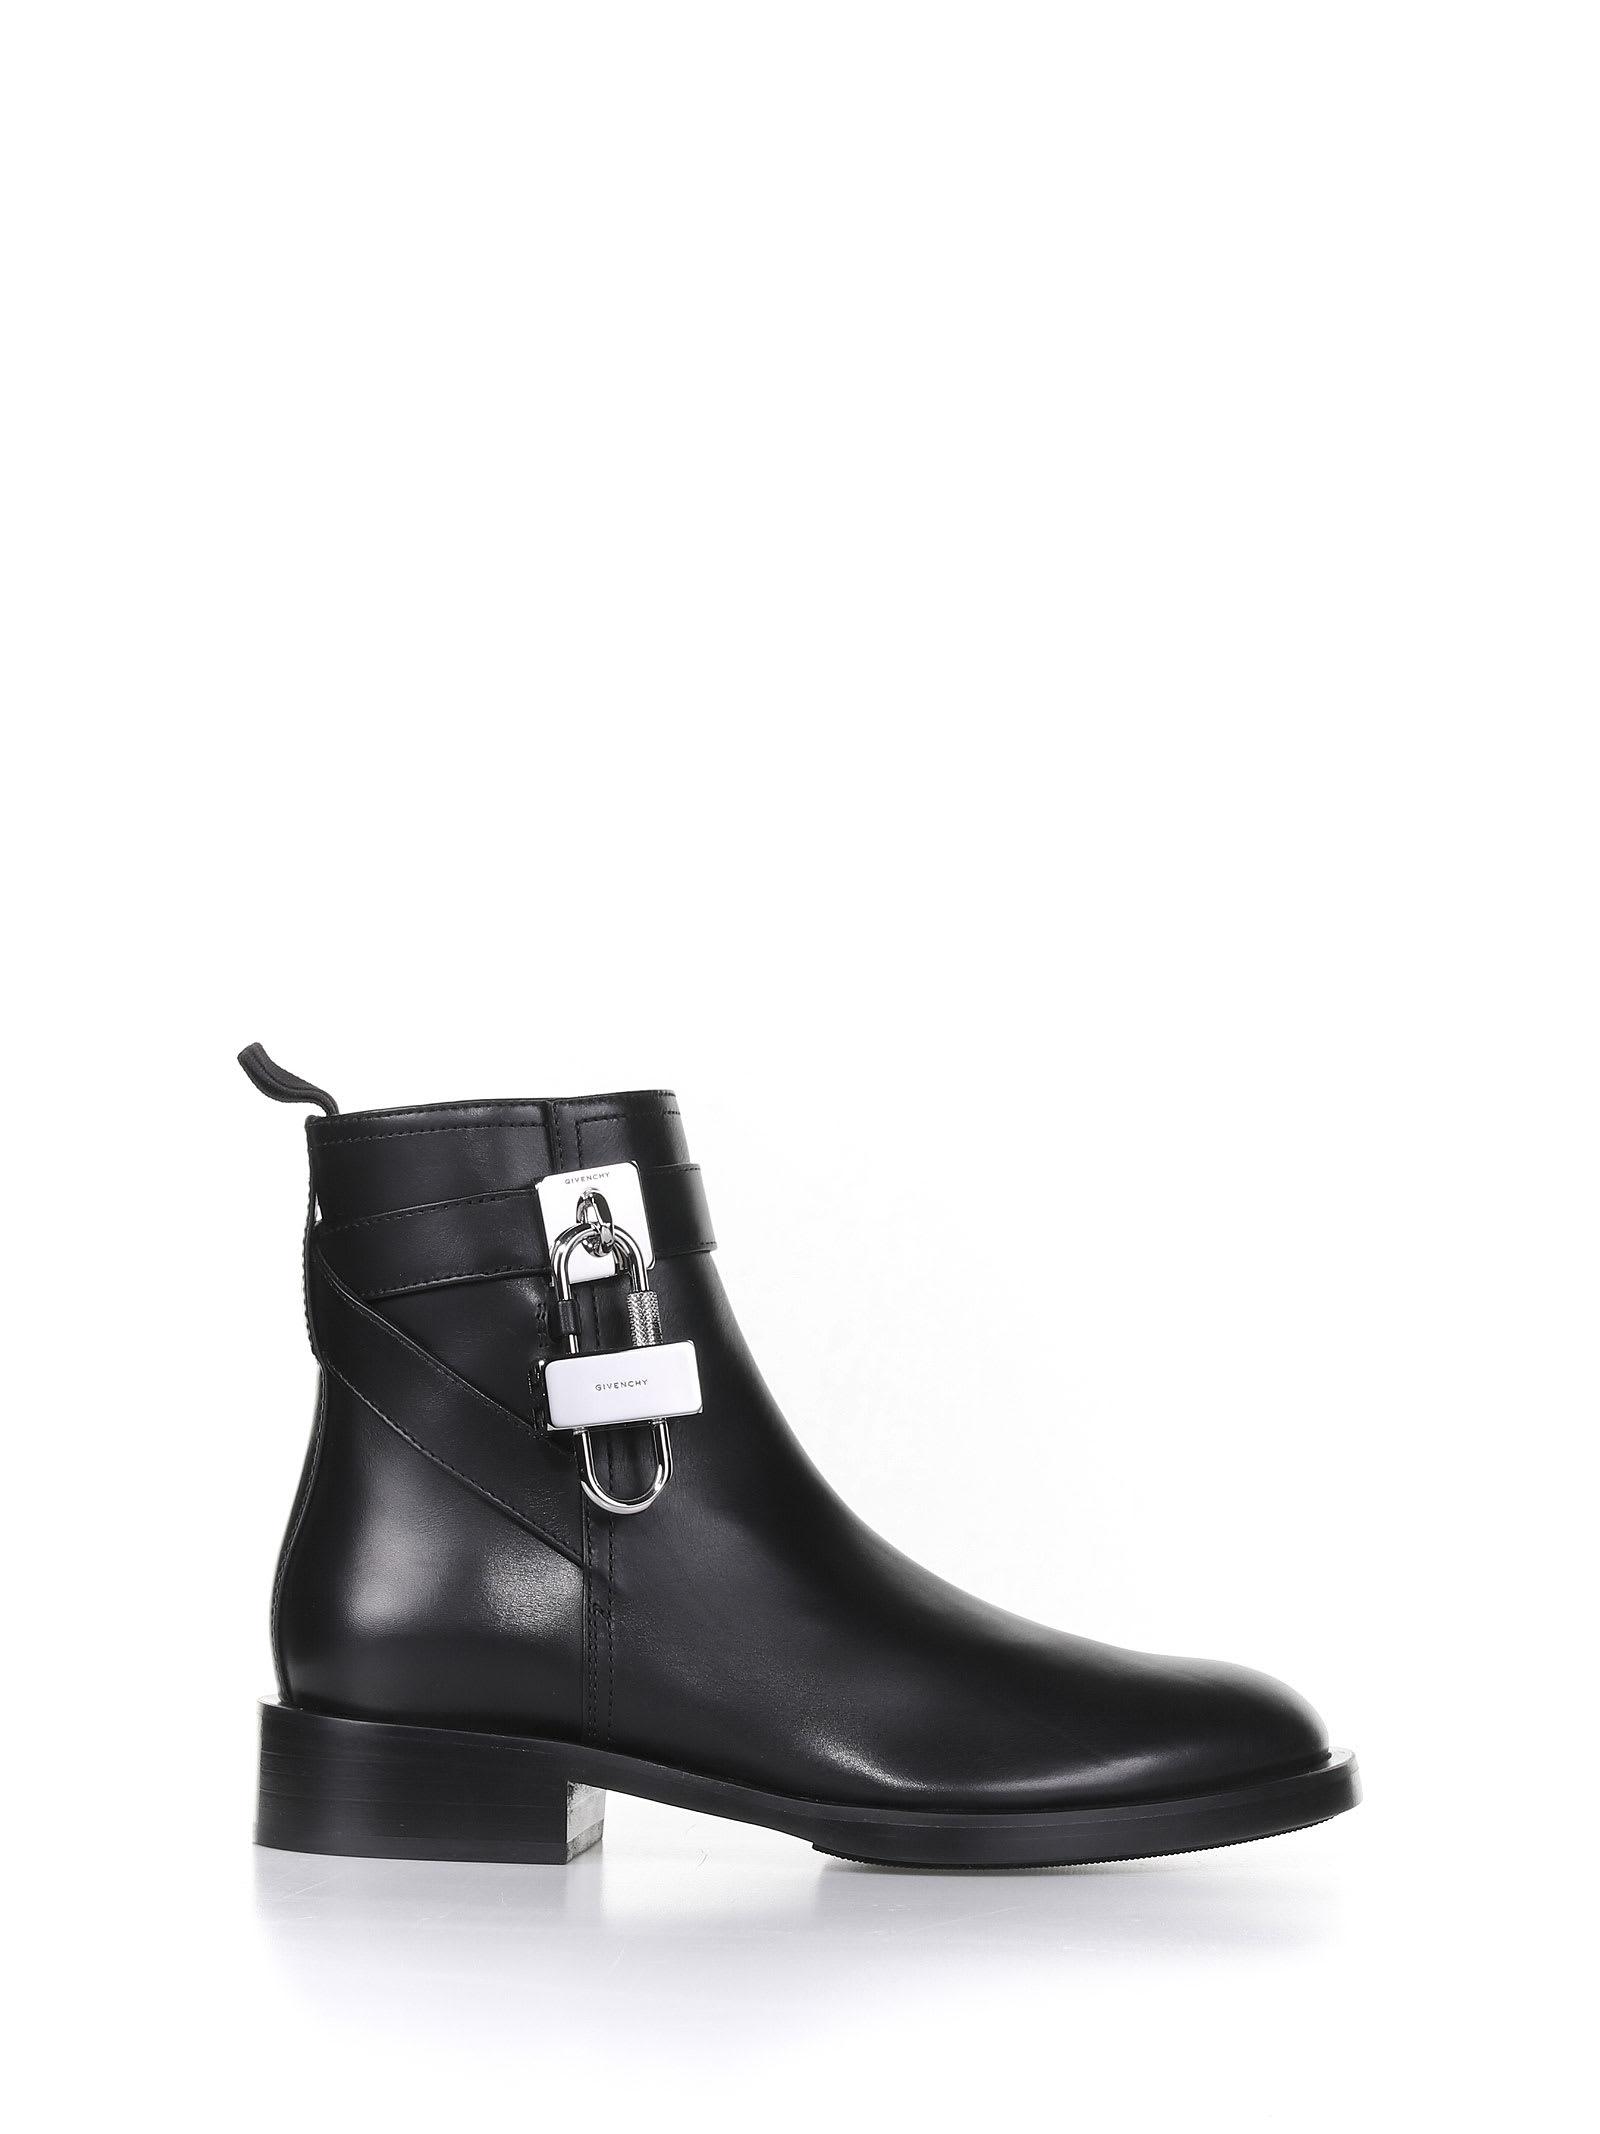 Givenchy Lock Ankle Boots - Women in Black | Lyst